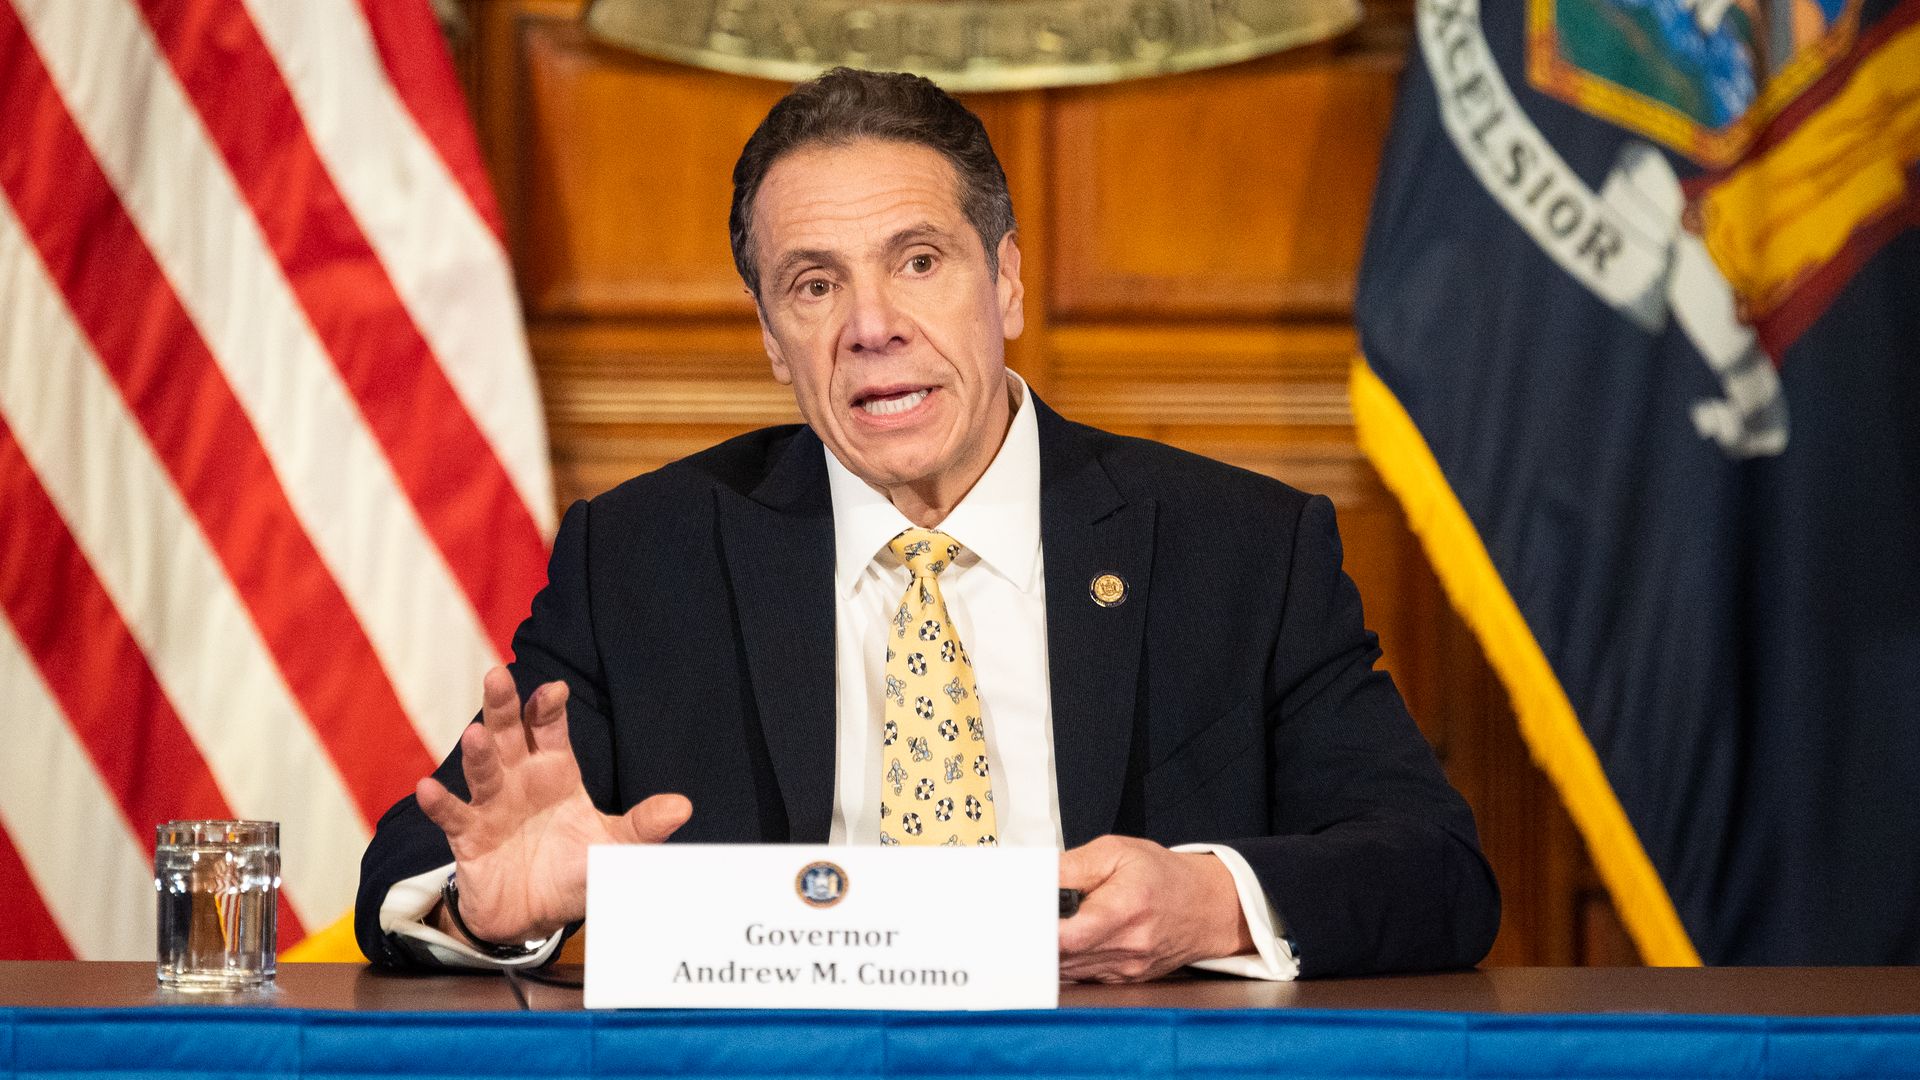 New York Governor, Andrew Cuomo (D) speaking at a press Conference at the State Capitol.